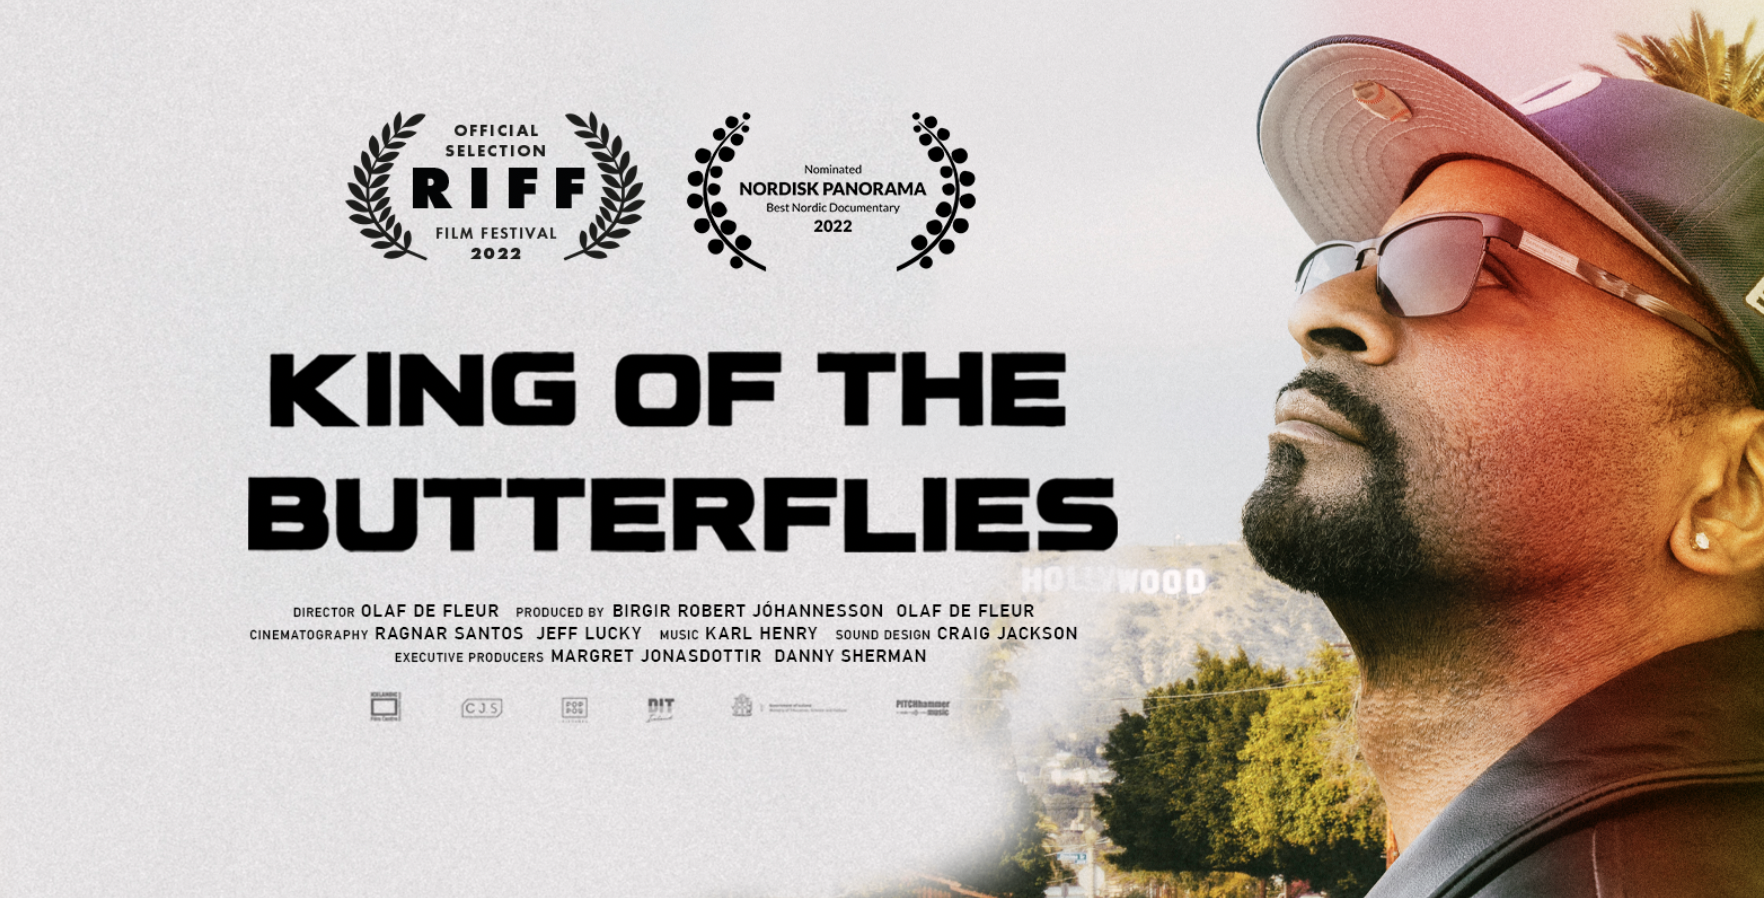 "King of The Butterflies" Nominated For Best Nordic Documentary